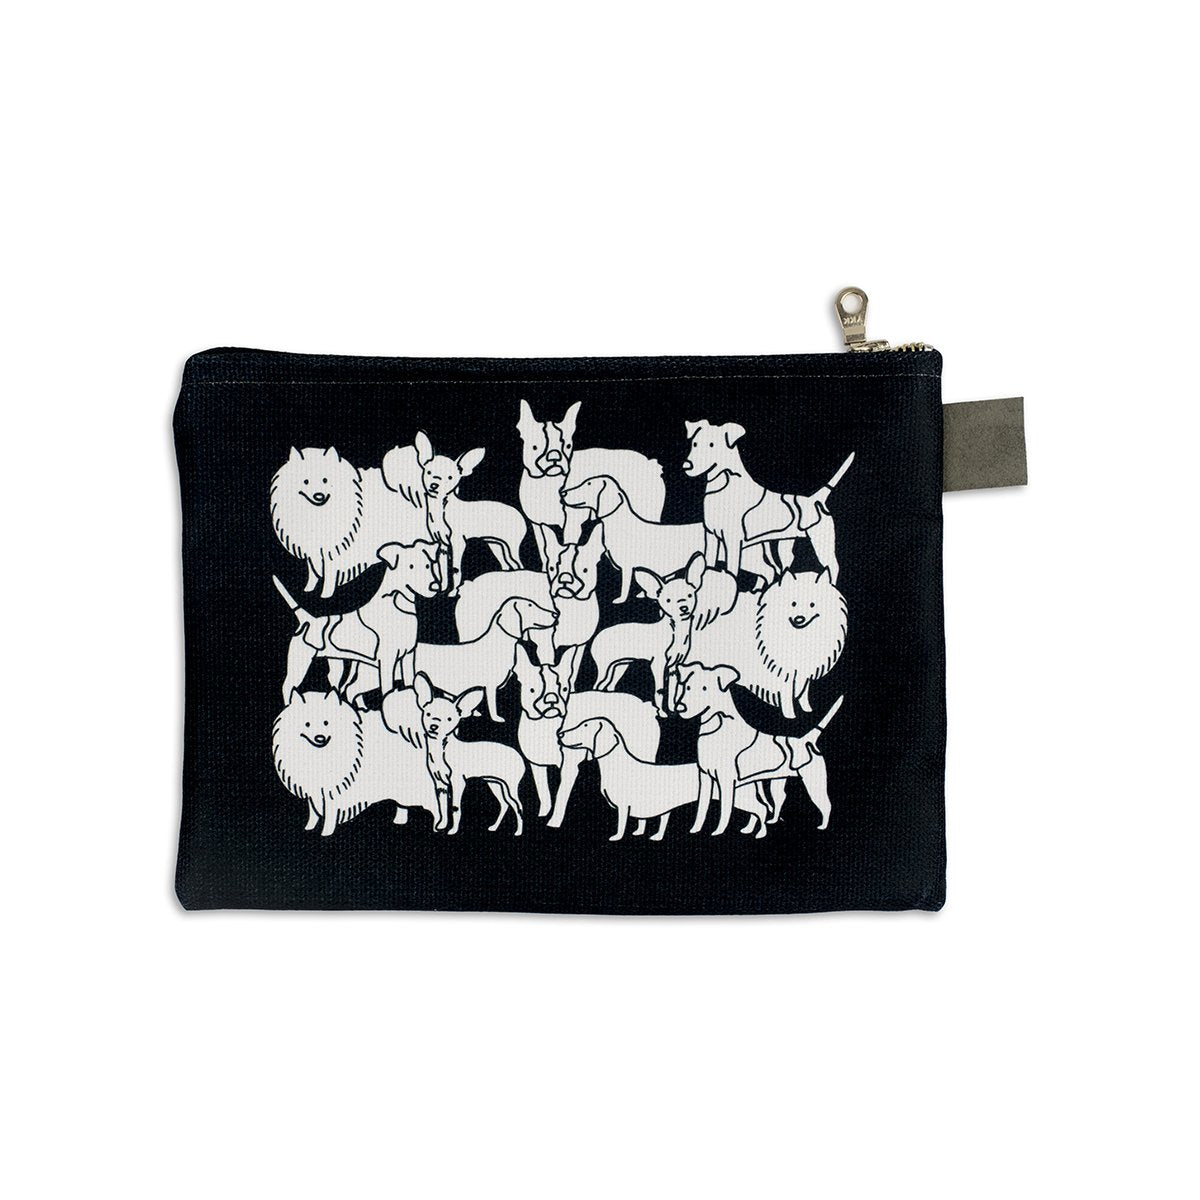 black zip case with various illustrations of different dog breeds mixed together in white